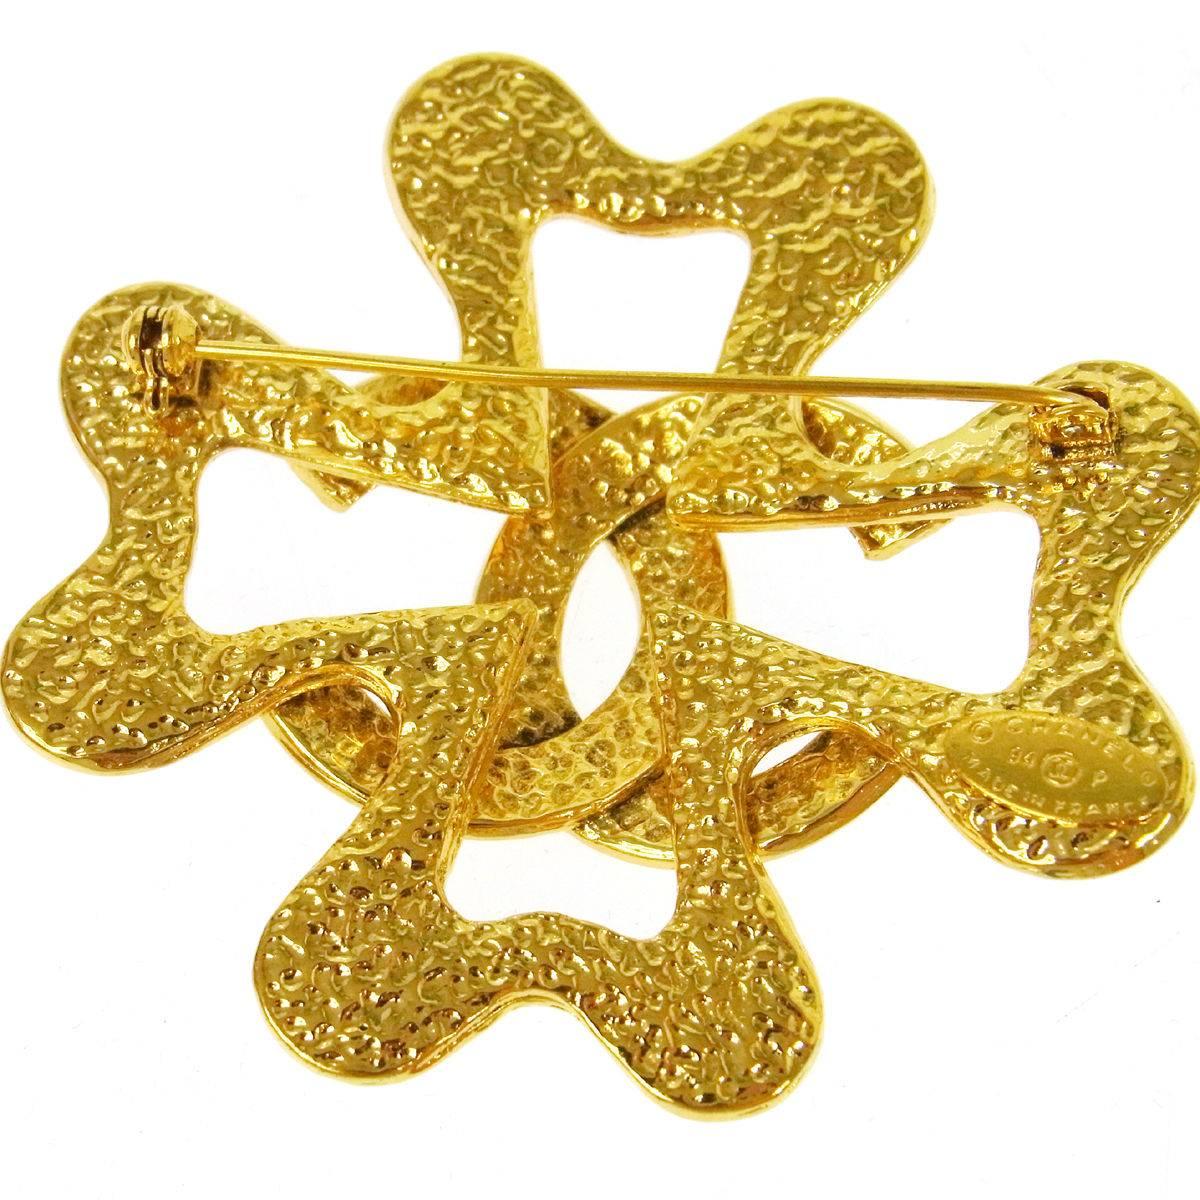 CURATOR'S NOTES

Talk about a statement piece!  This gorgeous Chanel cross brooch is substantial in size to kick any outfit into high gear!

Metal
Gold tone
Pin closure
Made in France
Measures 2.5" W x 2.5" H

Shop Newfound Luxury for